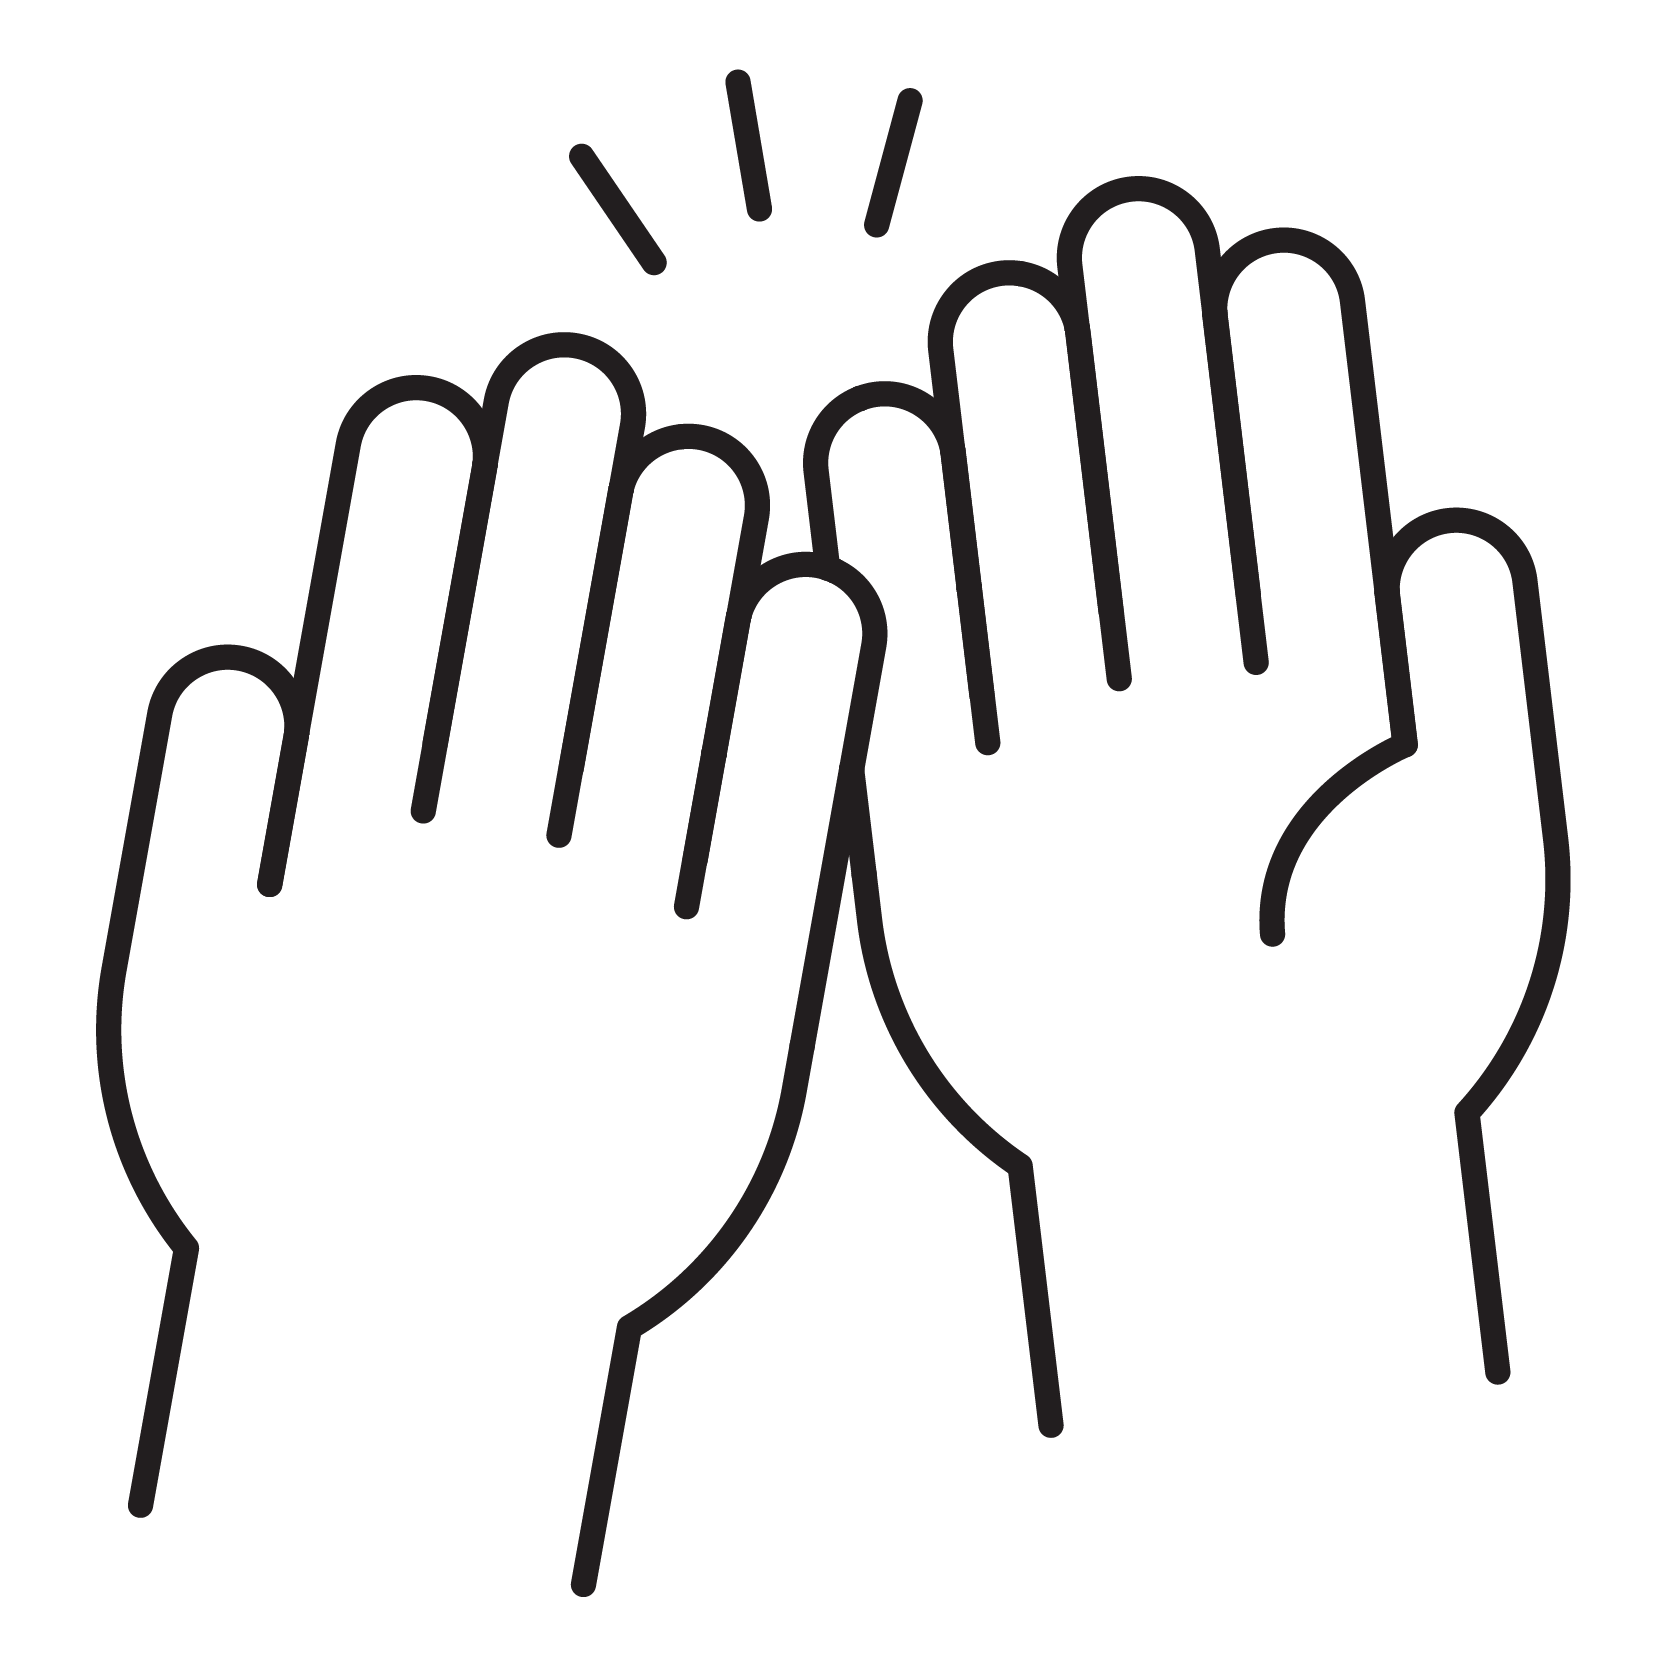 High-five icon